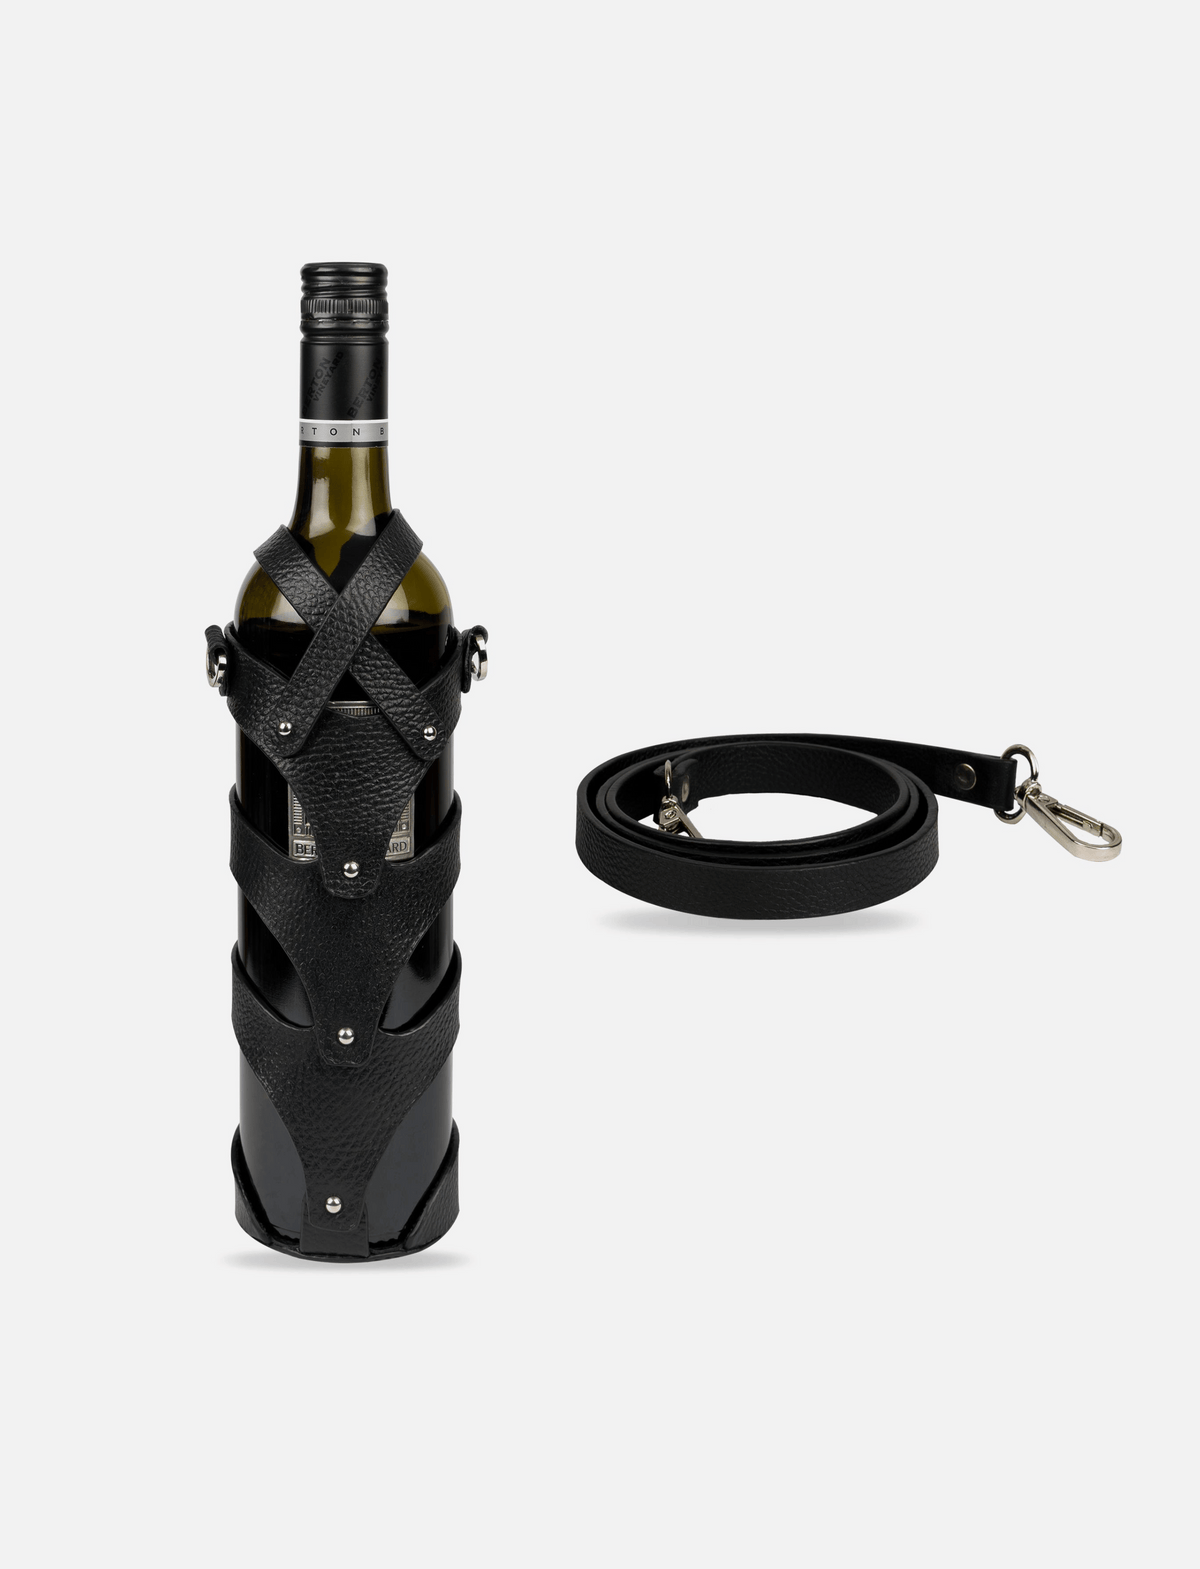 Sustainable wine bottle or a water bottle case made ethically and responsibly in India with upcycled pure leather. It is consciously and sustainable designed by using scraps and waste of high quality leather.